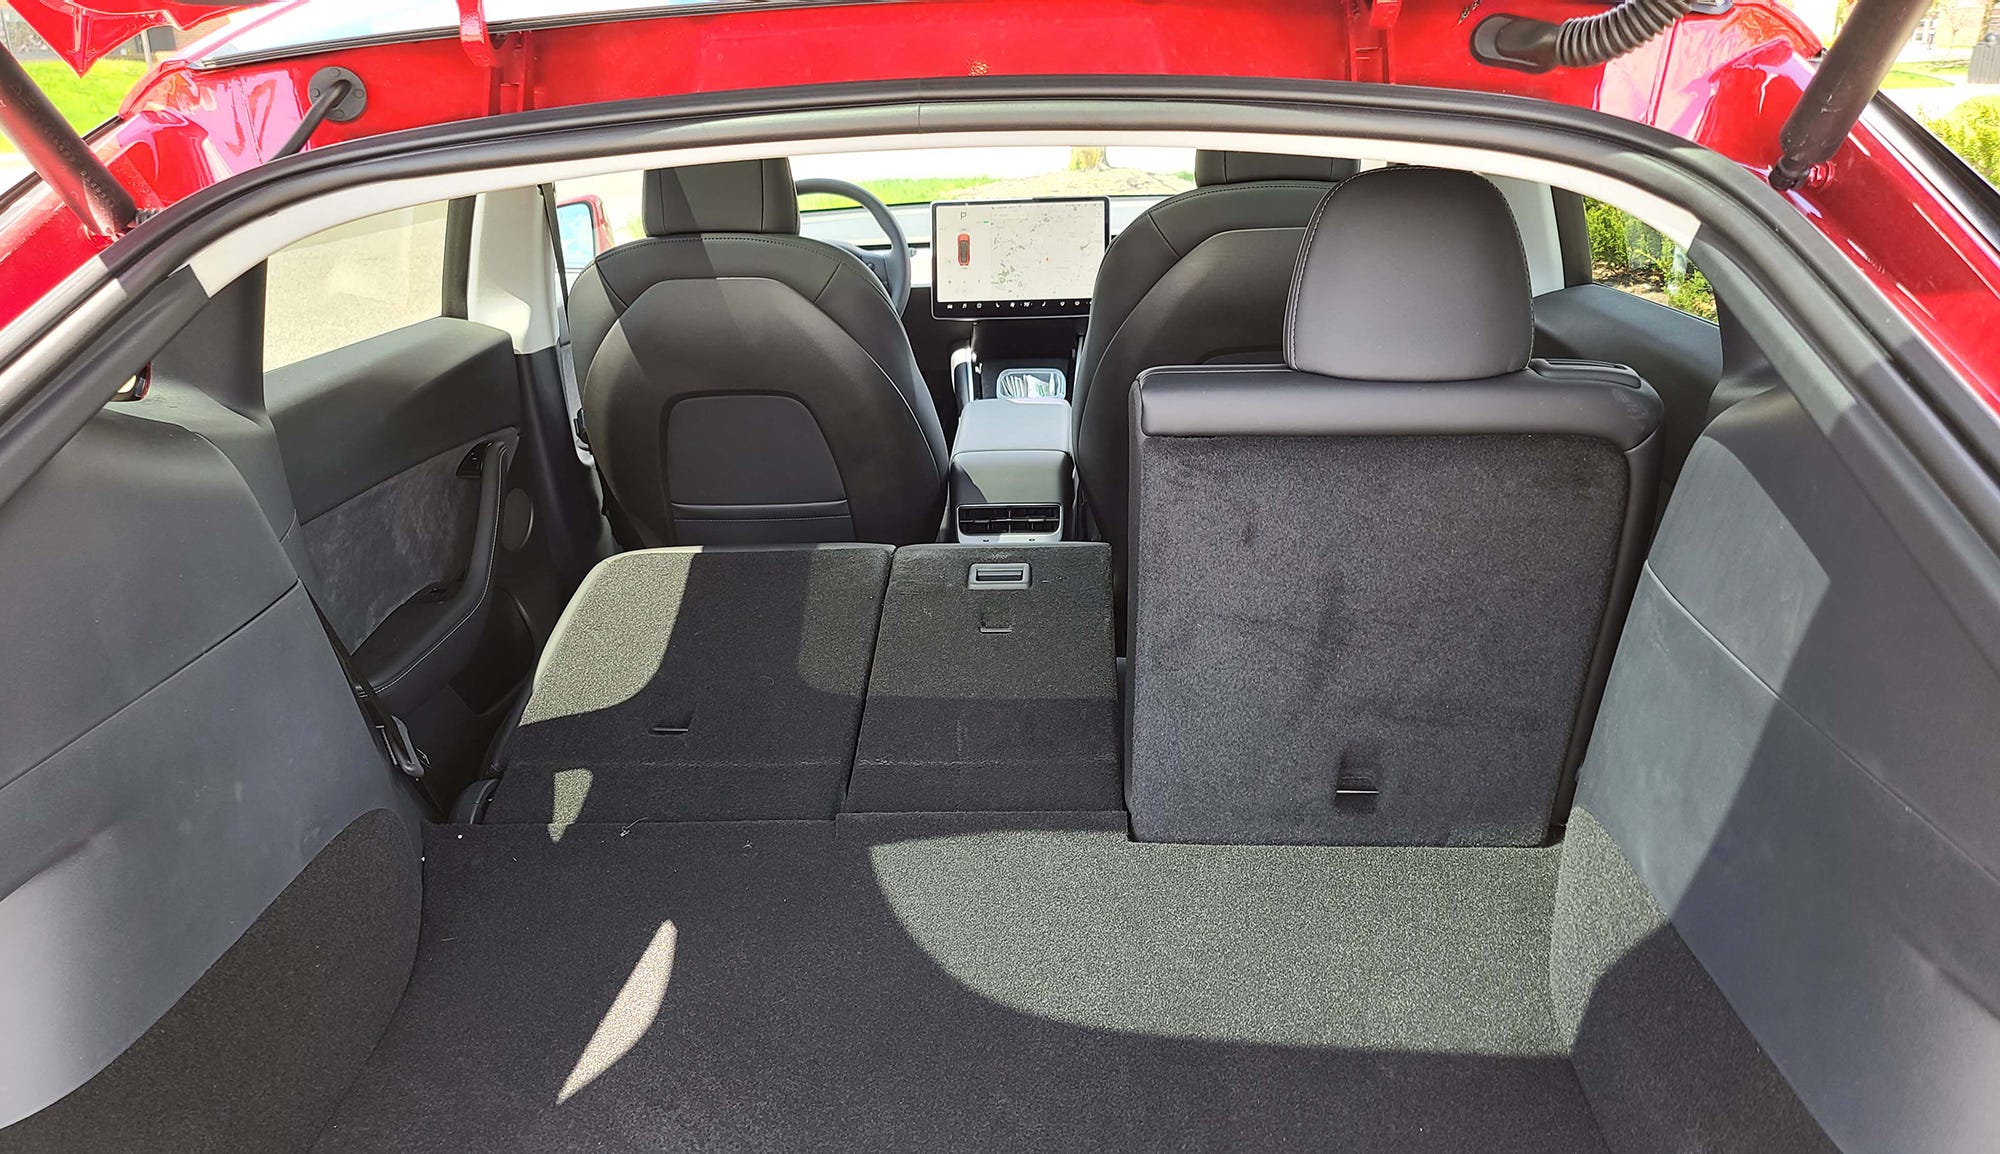 Flatten the Tesla Model Y's rear seats and it gains a whopping 68 cubic feet of cargo room.